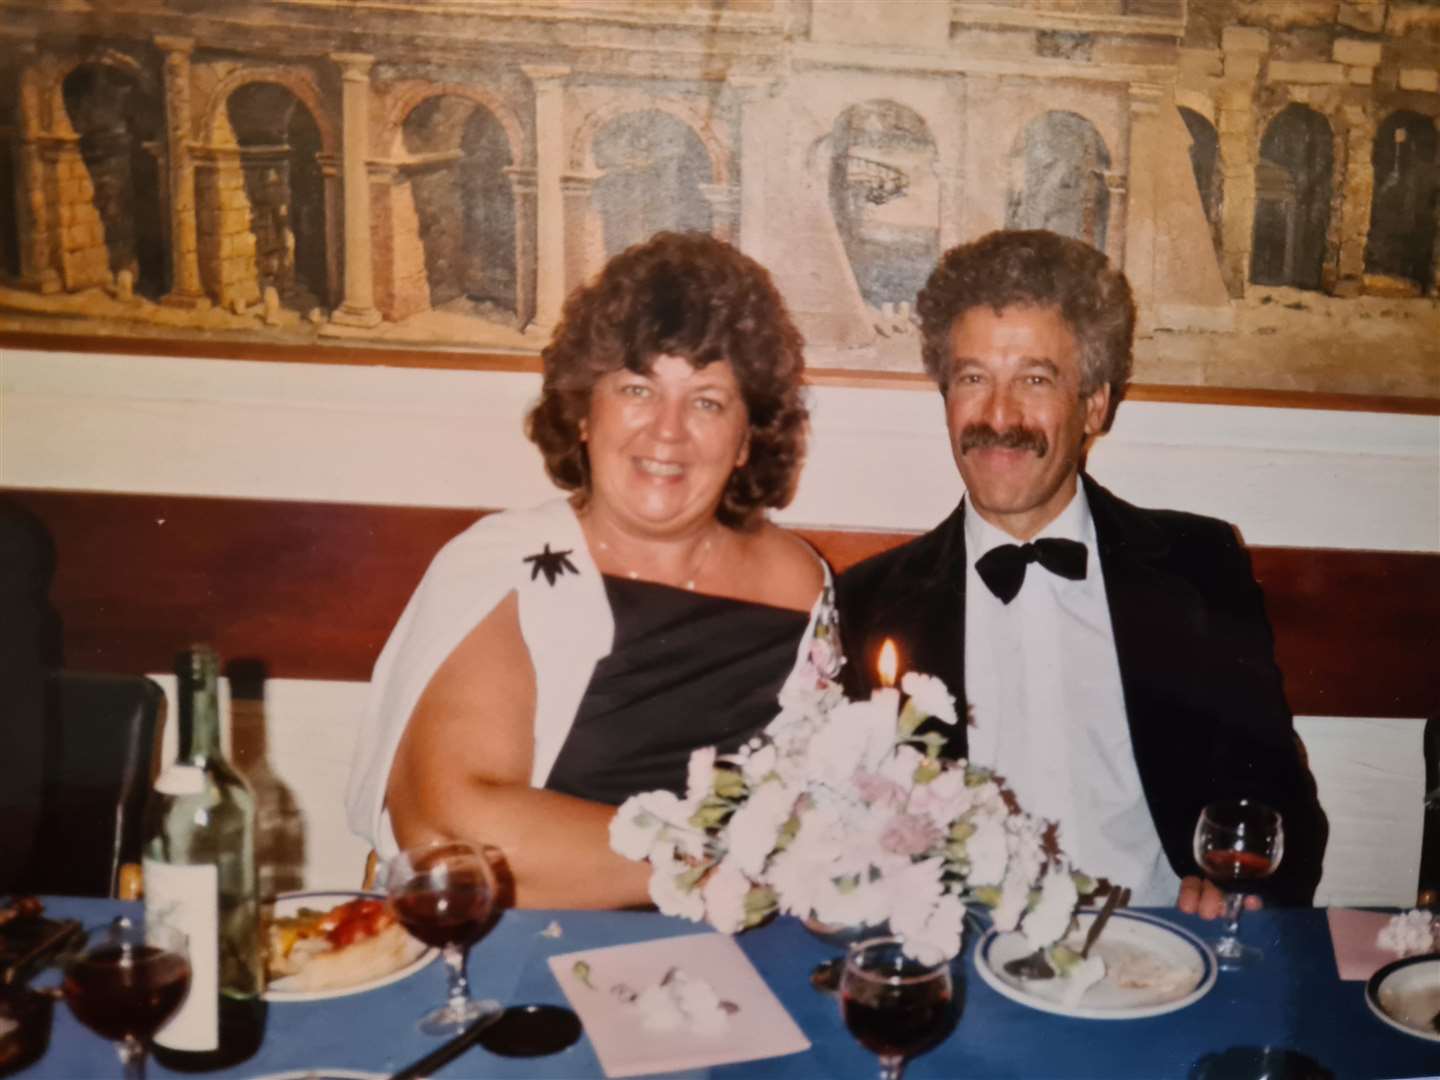 Alan Melinek with his wife Pat, who died in 2006 with ovarian cancer (Cancer Research UK/pianograndad.com)